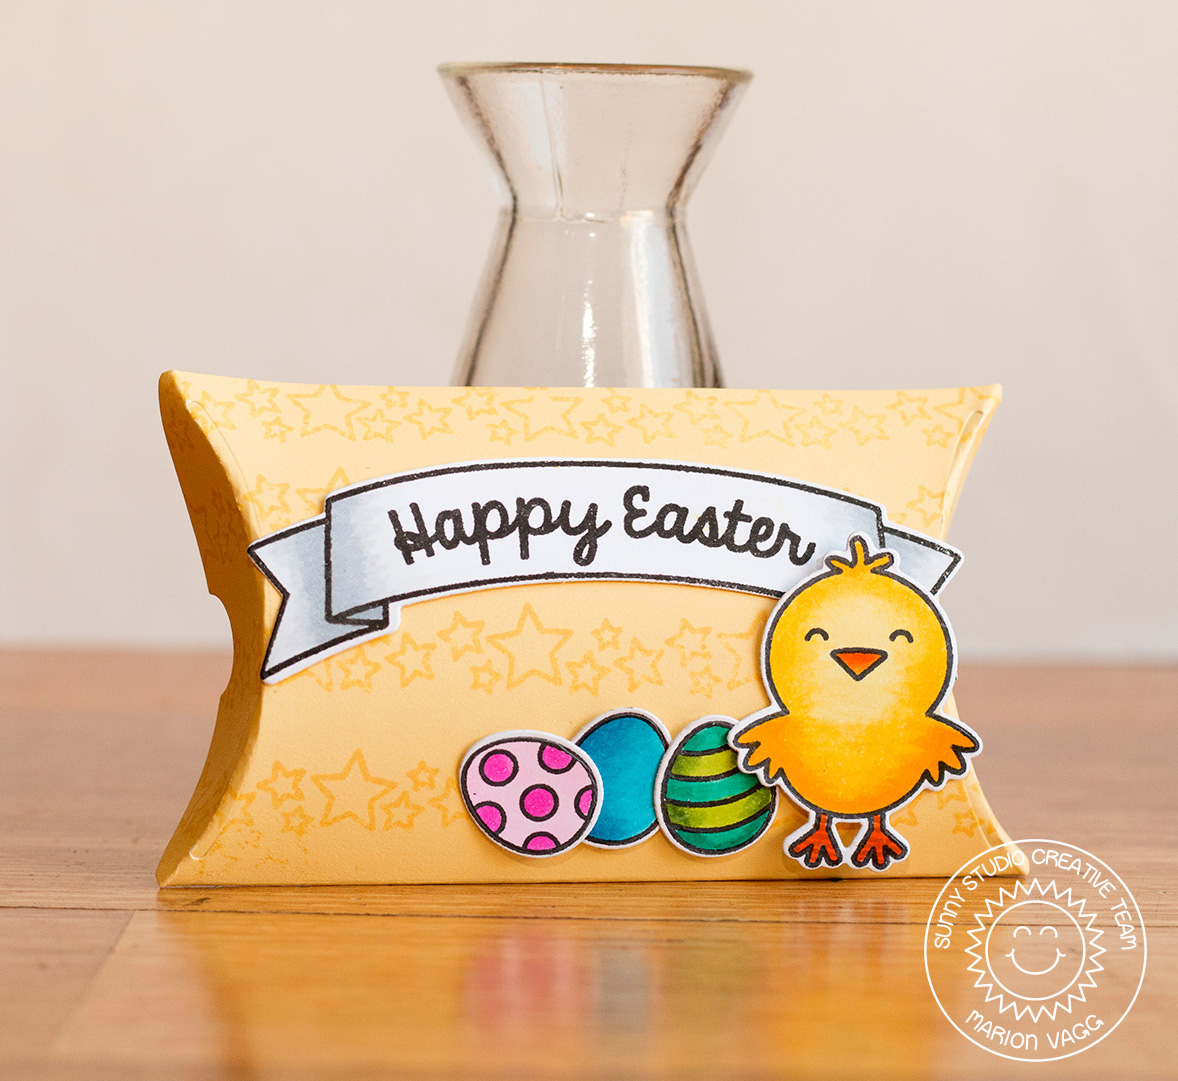 Happy Easter Pillow Box | Marion Vagg